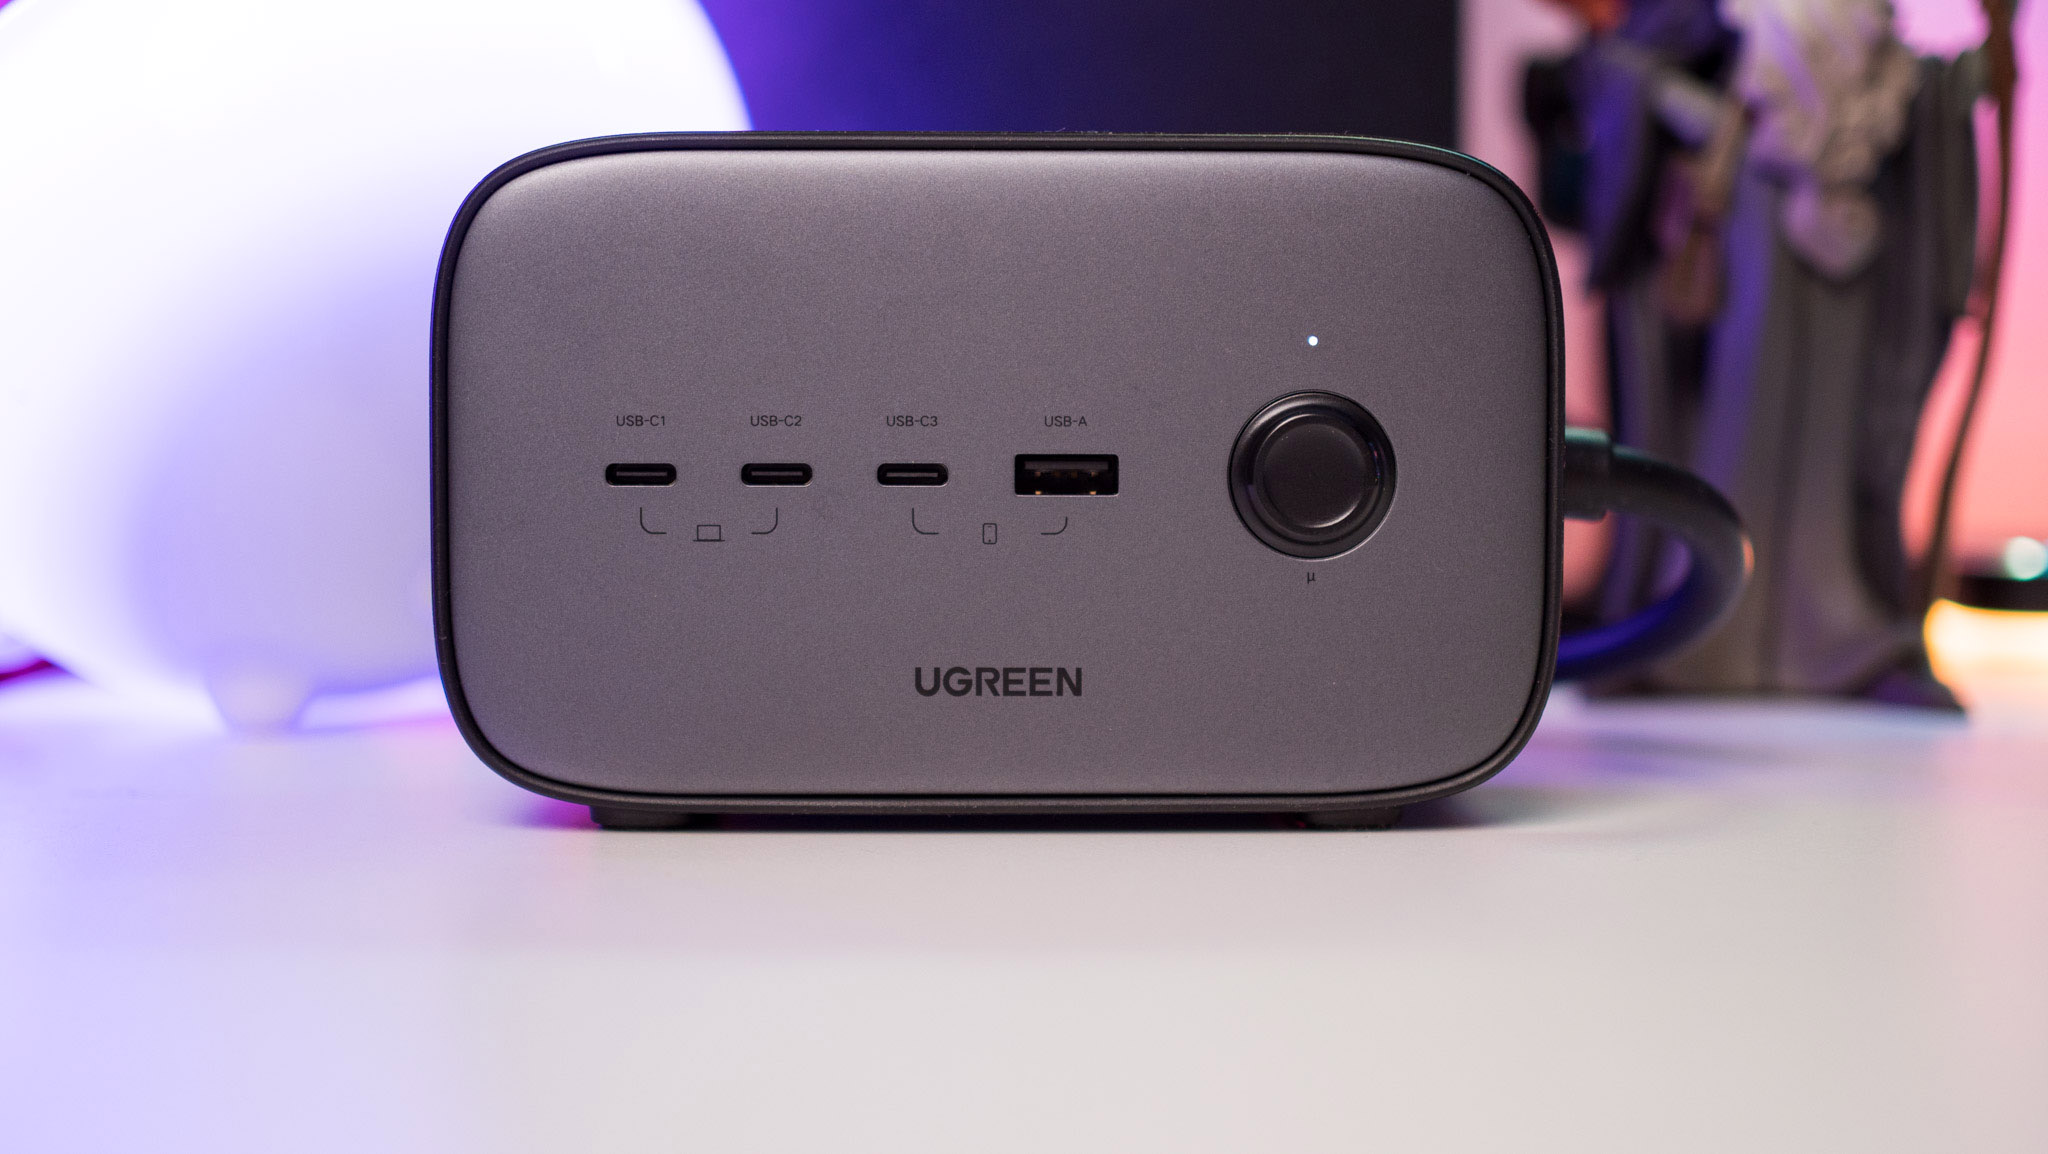 UGREEN 100W DigiNest Pro review: This 100W USB-C charging station